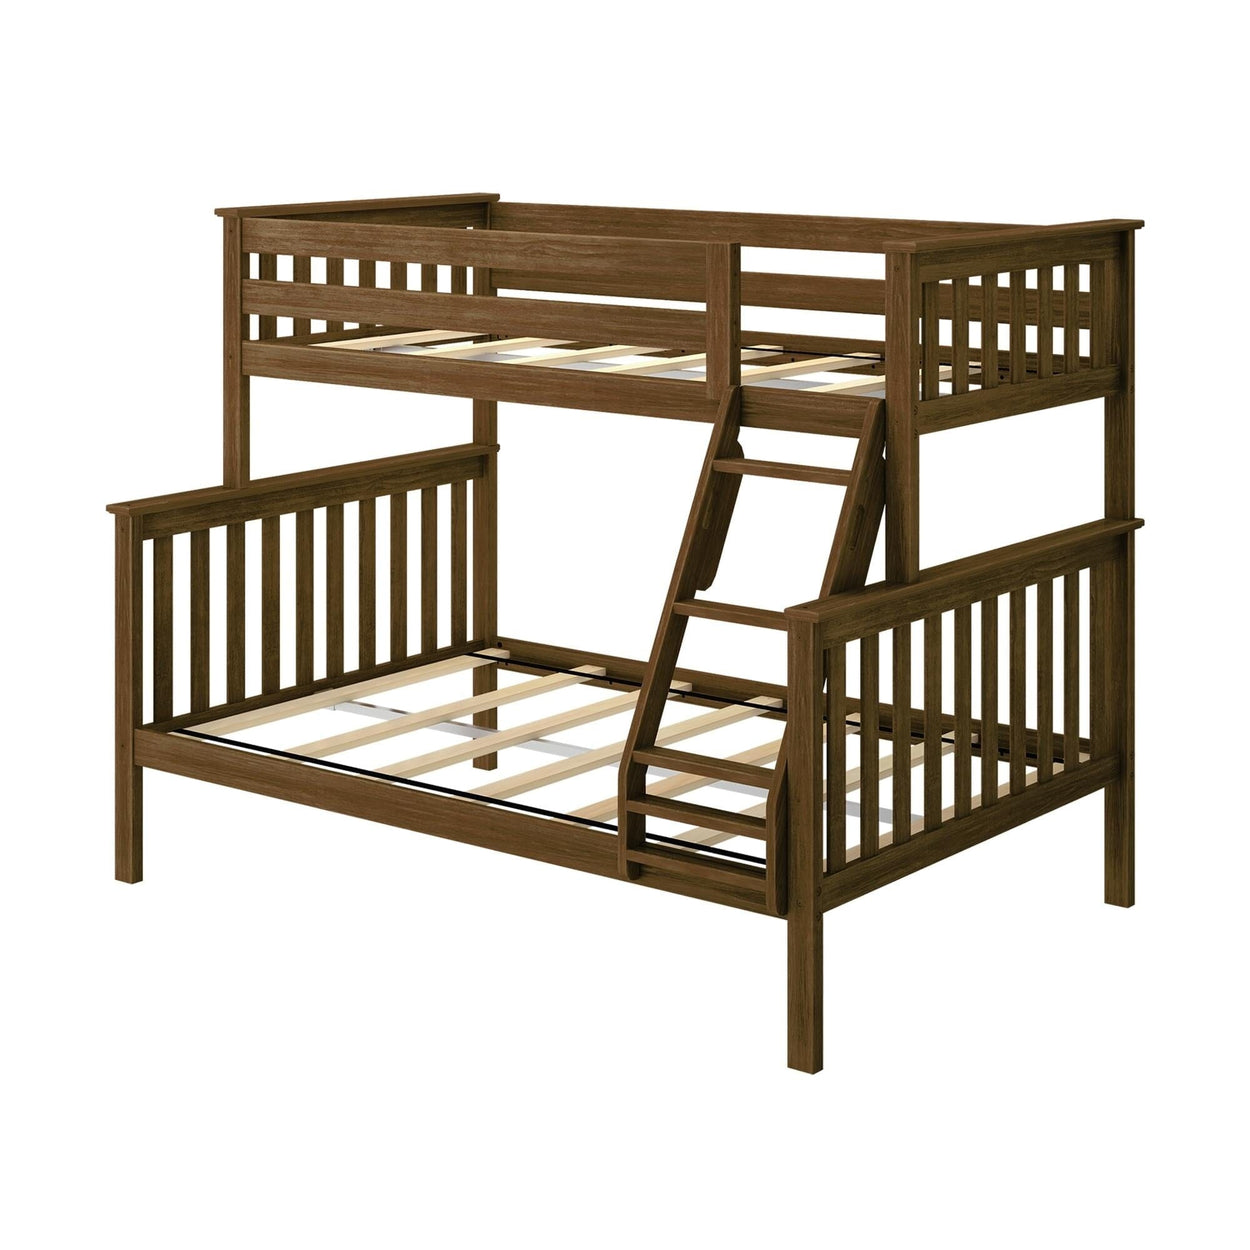 180231-008 : Bunk Beds Classic Twin over Full Bunk Bed, Walnut